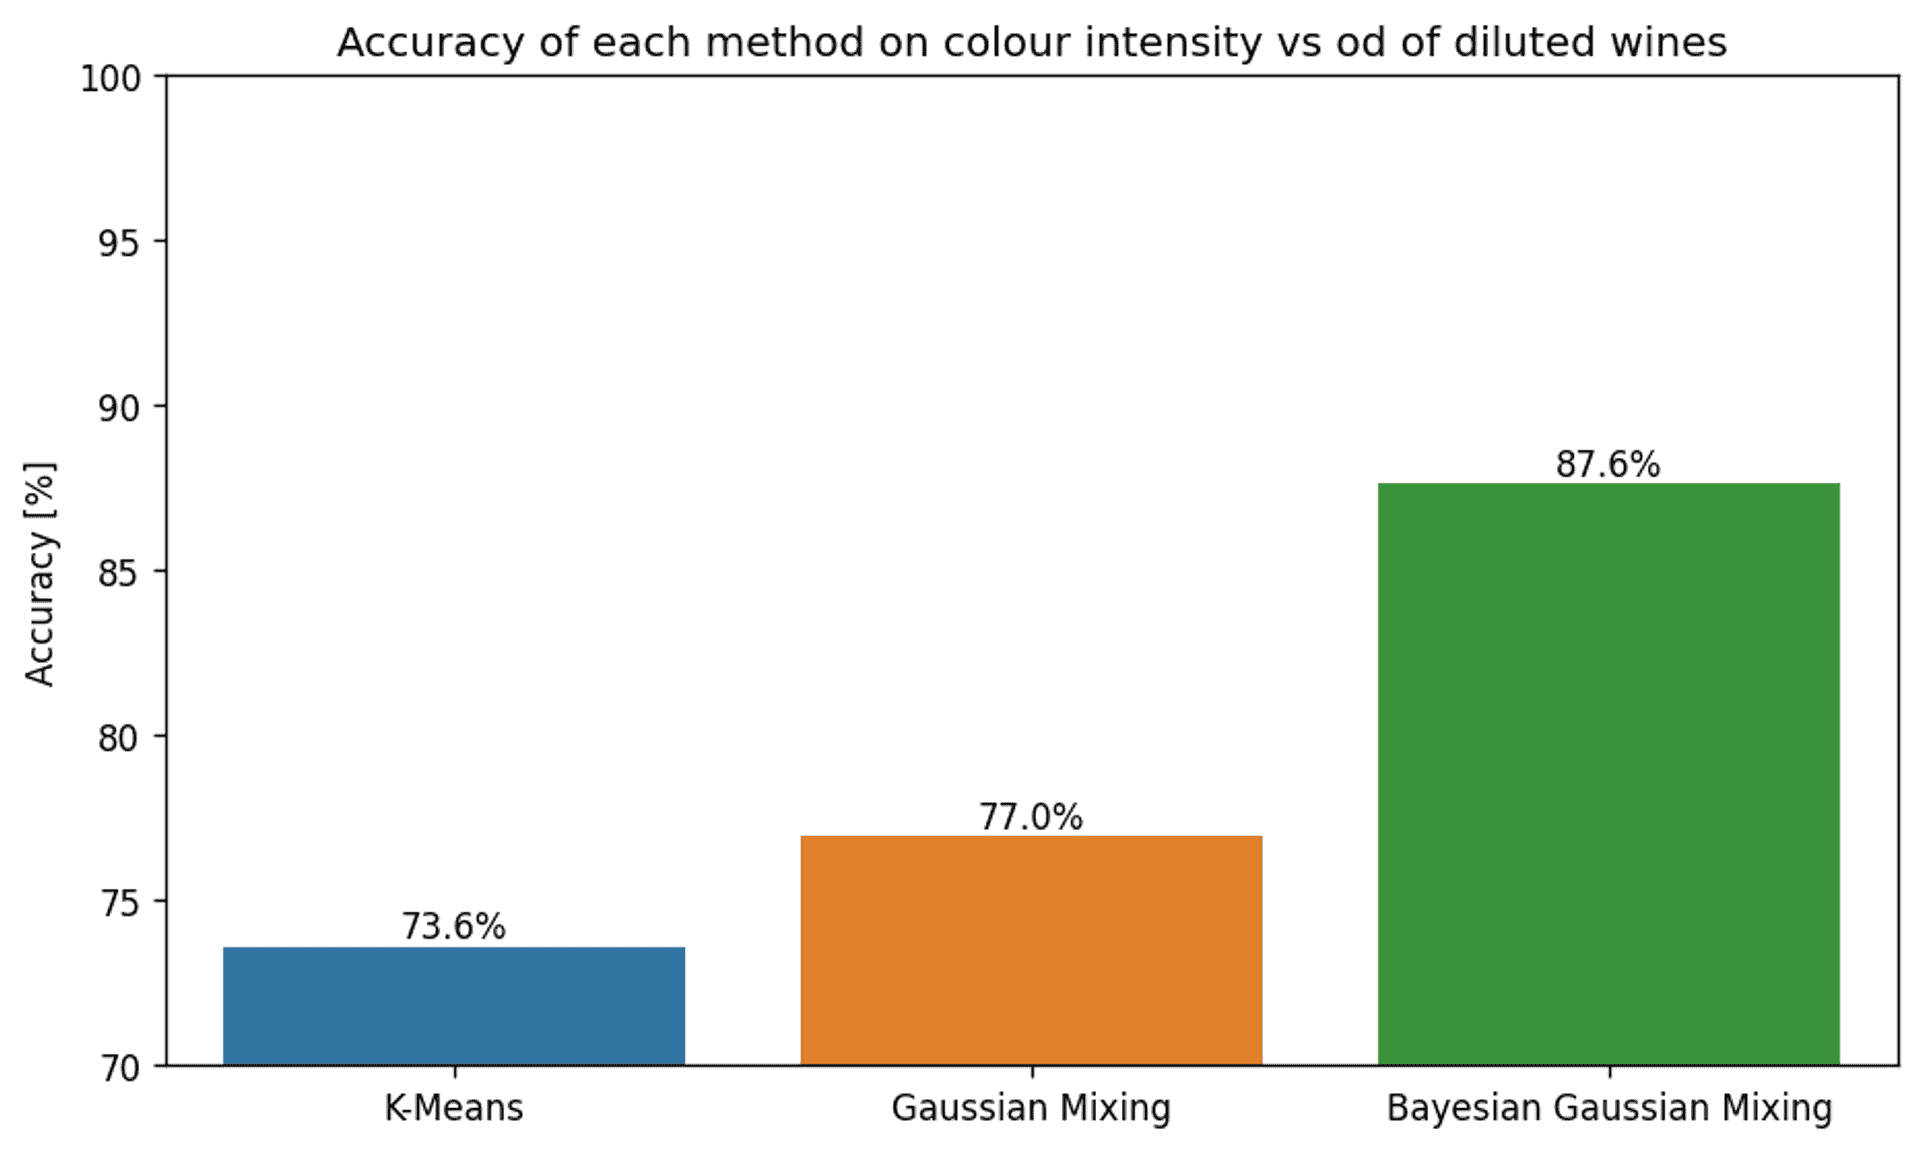 The accuracy of each clustering method for features colour intensity and OD280/OD315 of diluted wines